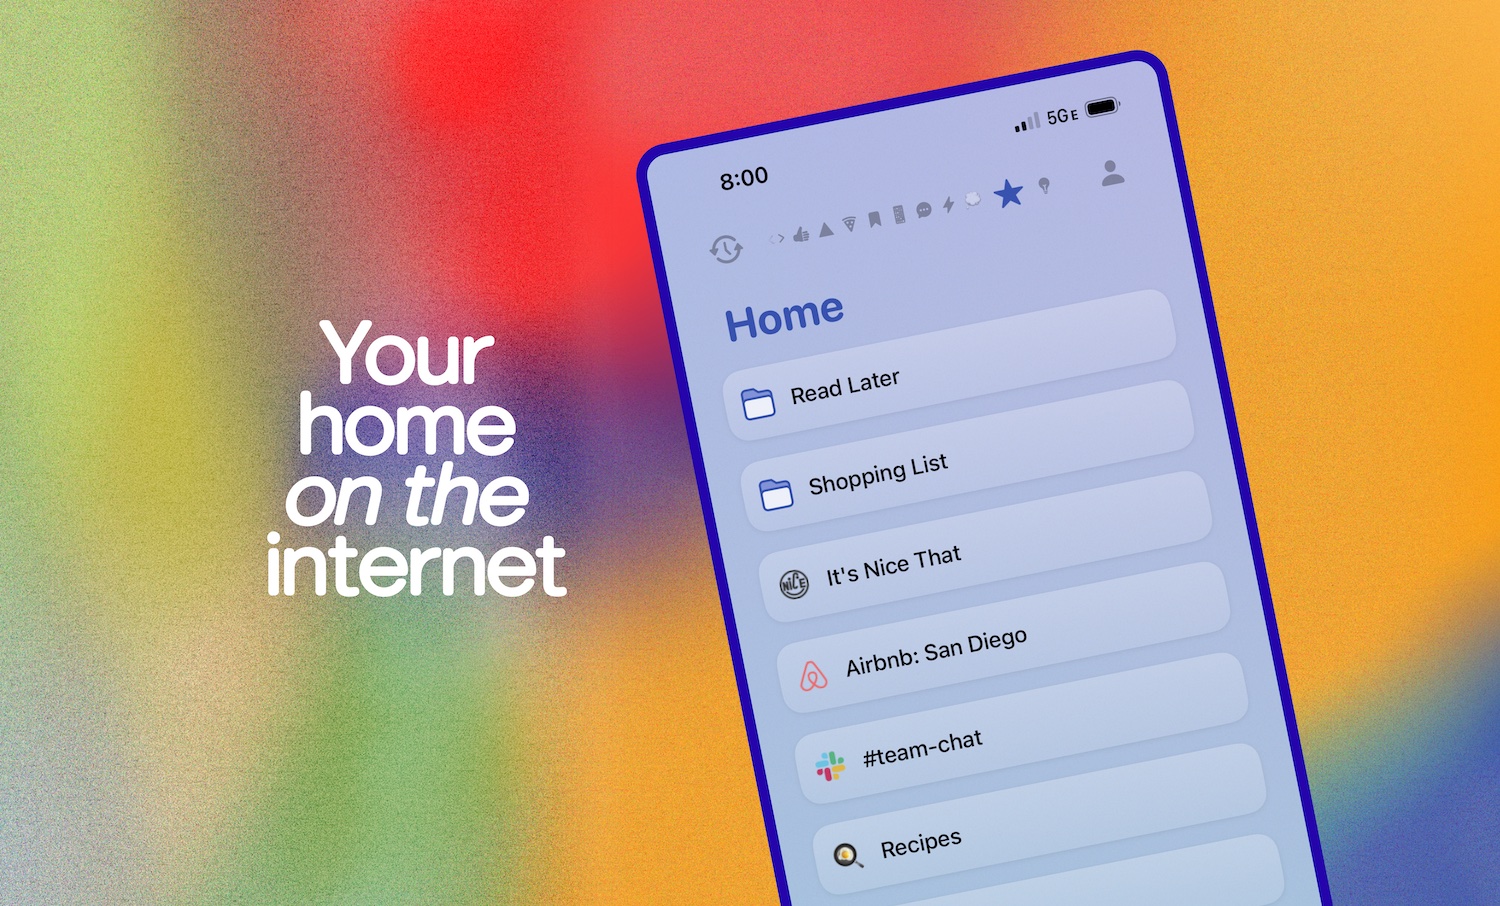 Arc - Your home on the internet